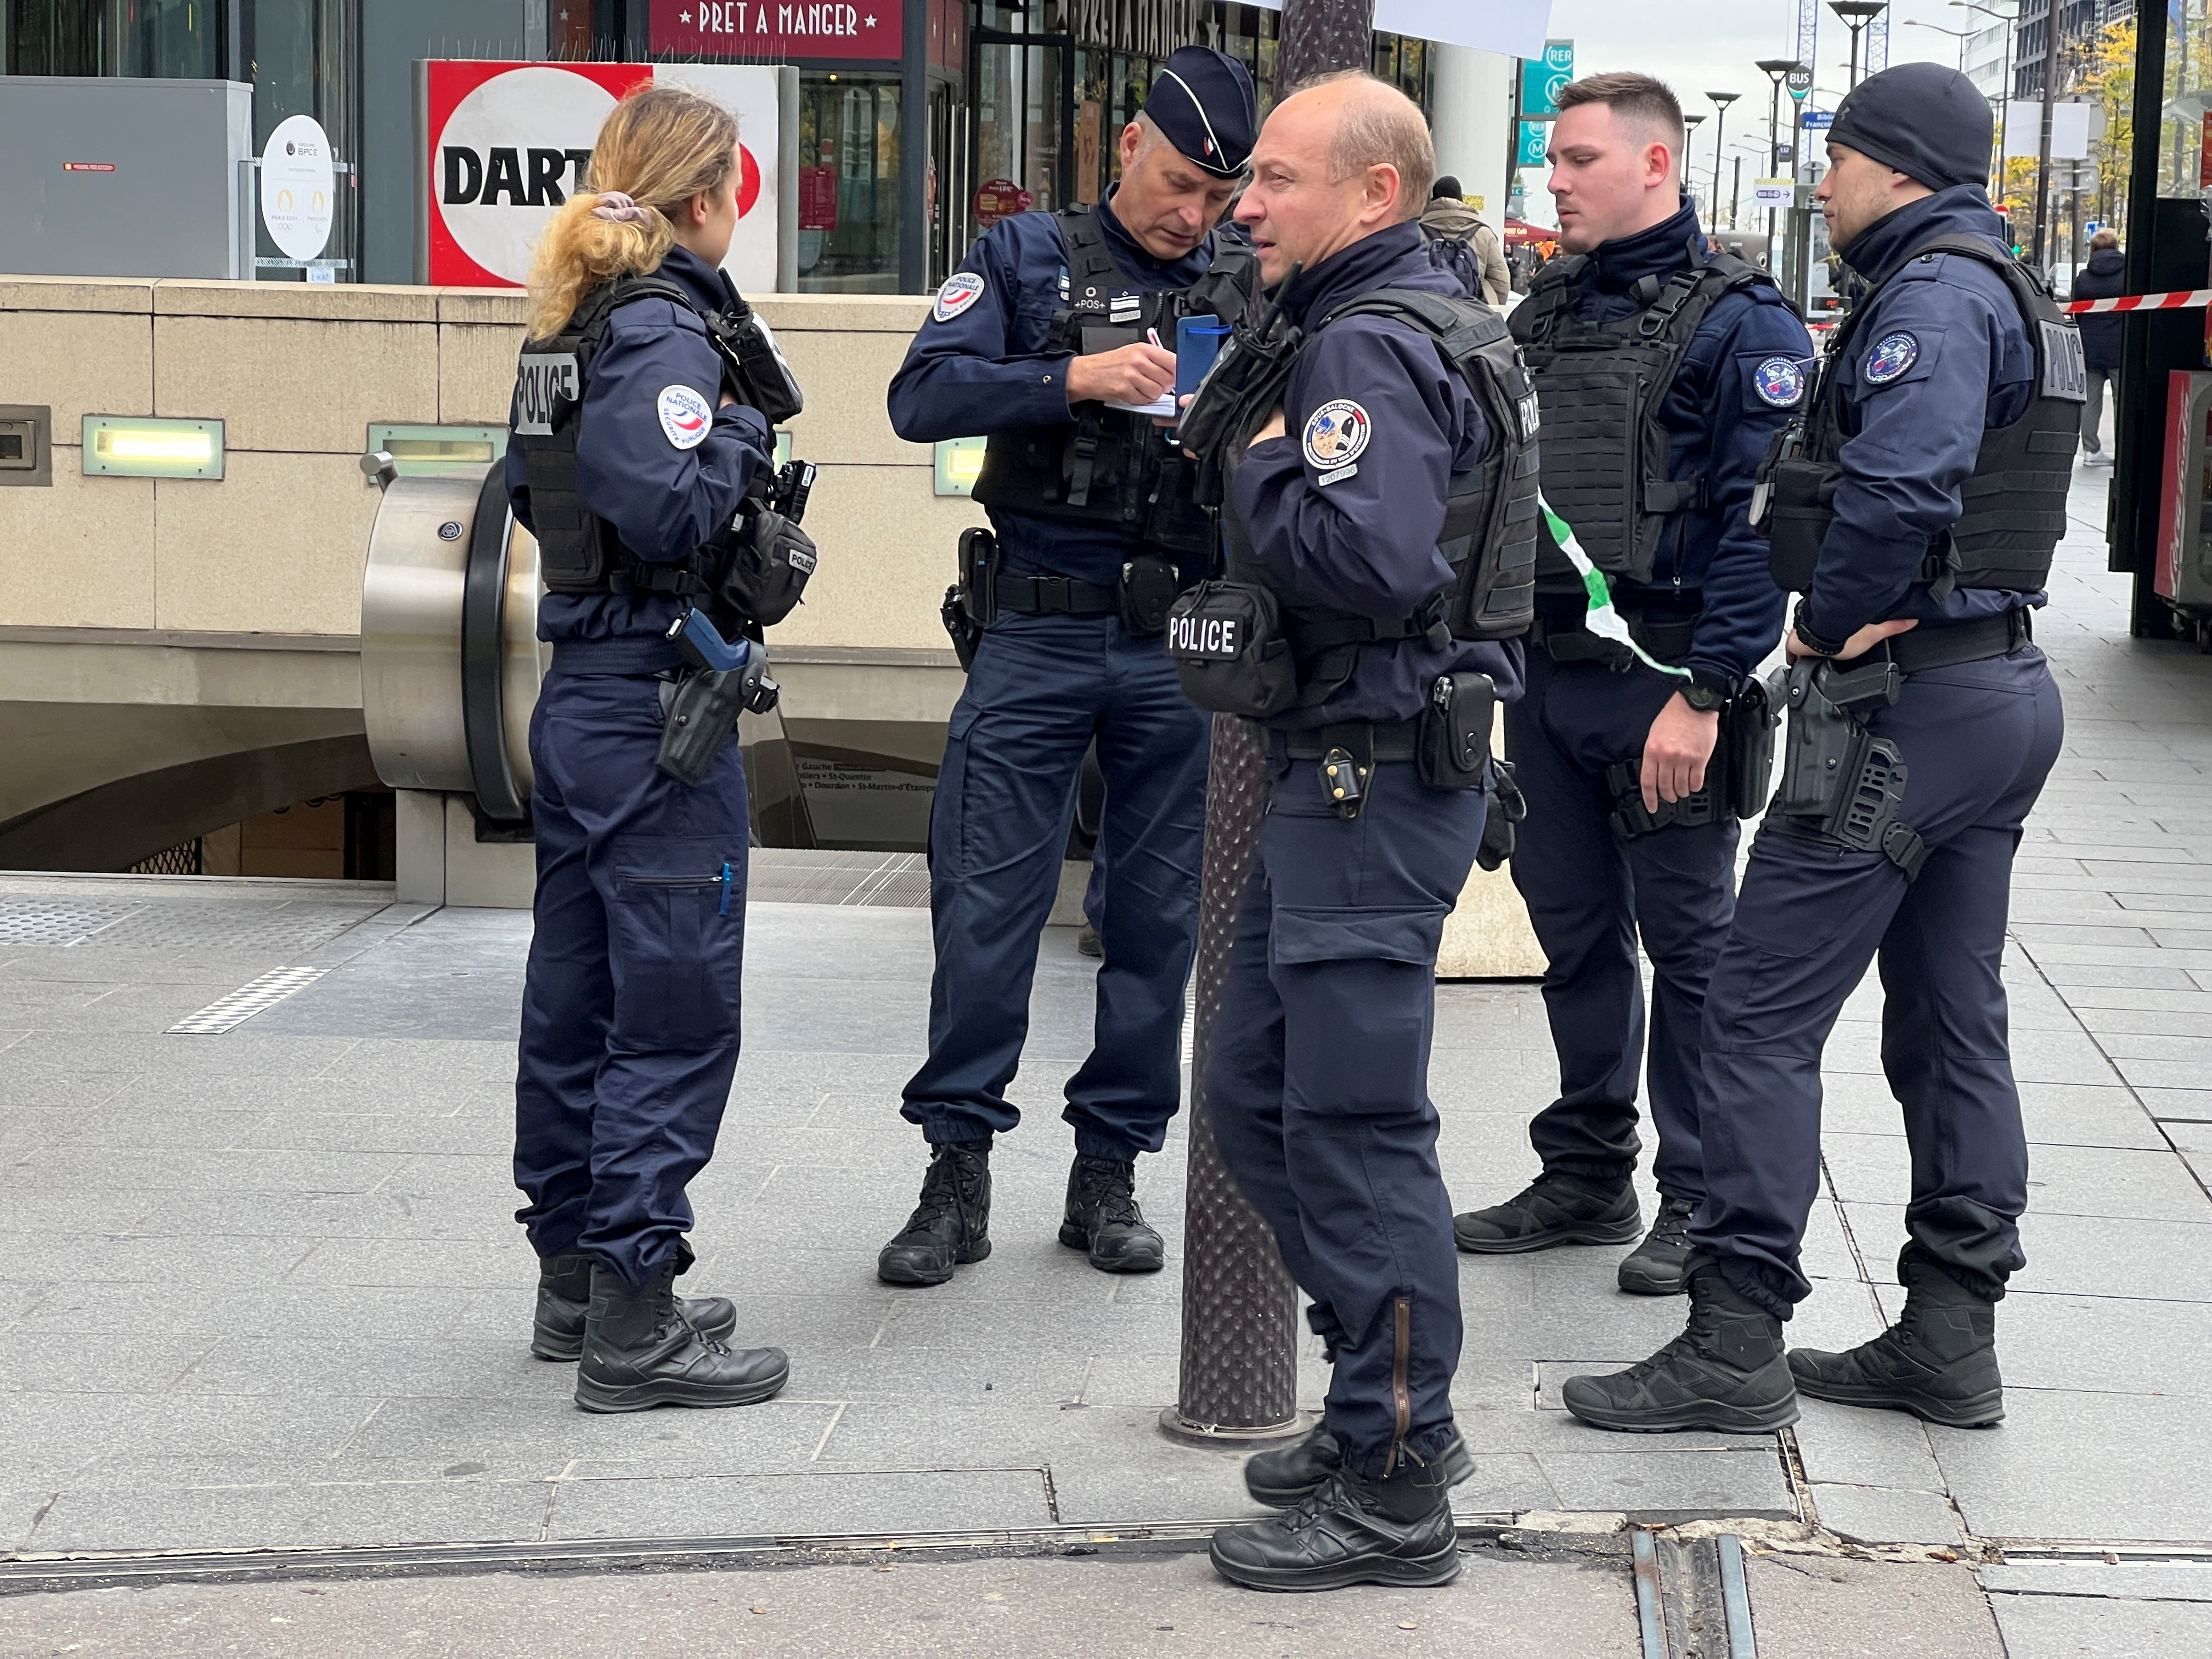 French police shoot woman after she uttered threats at train station in Paris